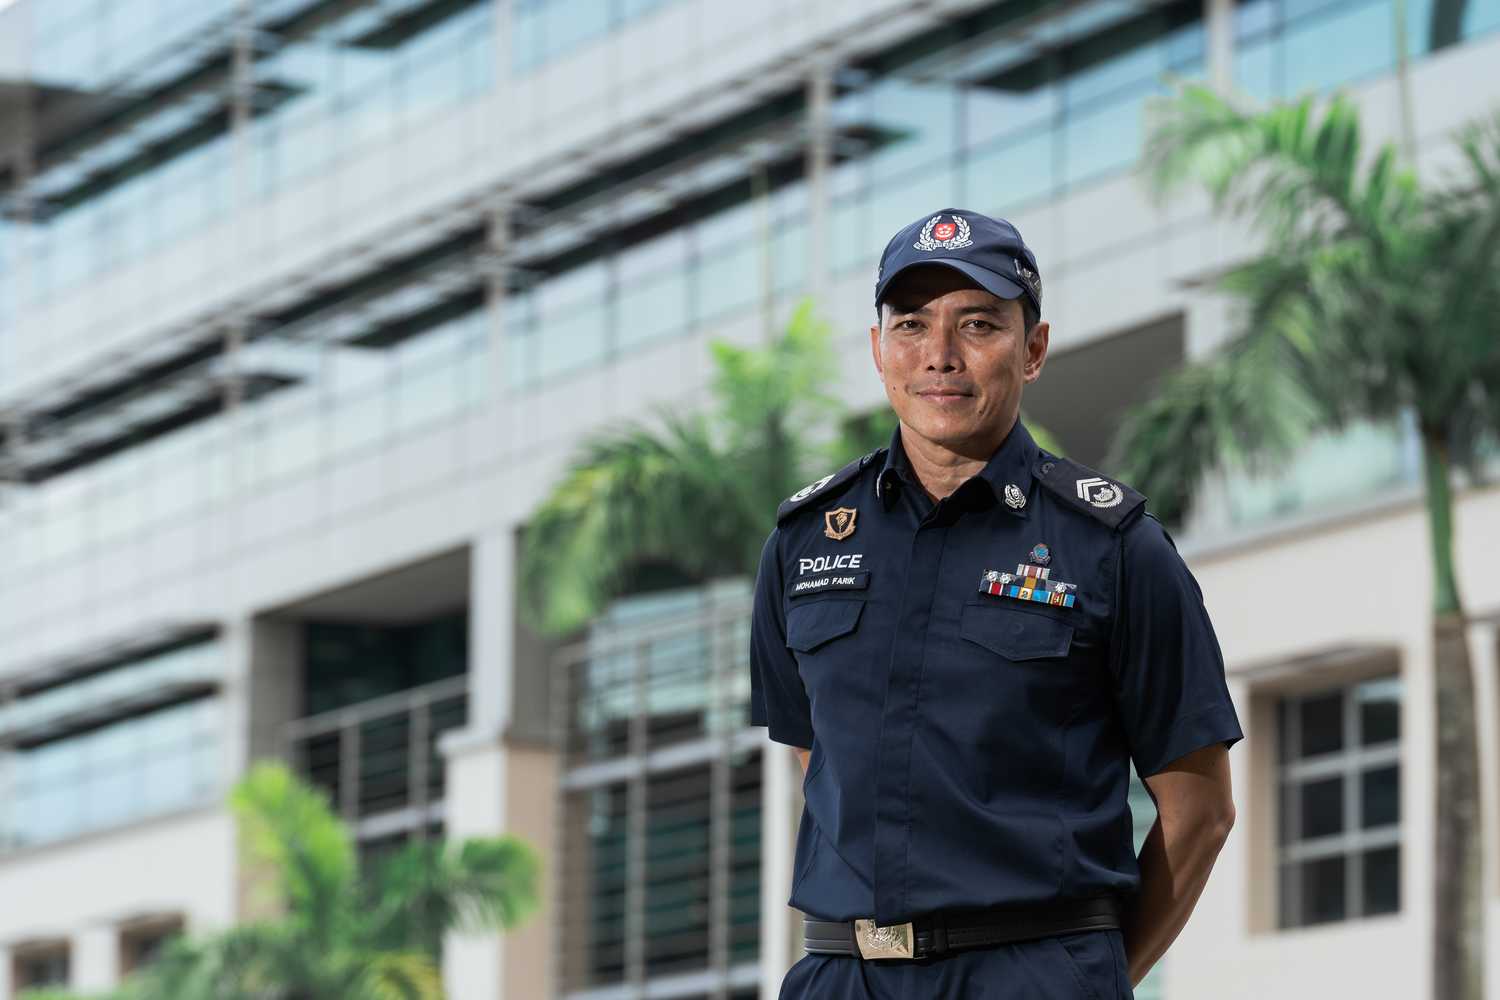 Station Inspector Farik, has no spectacles, wearing police uniform, well built, posing for a photo inside Home Team Academy